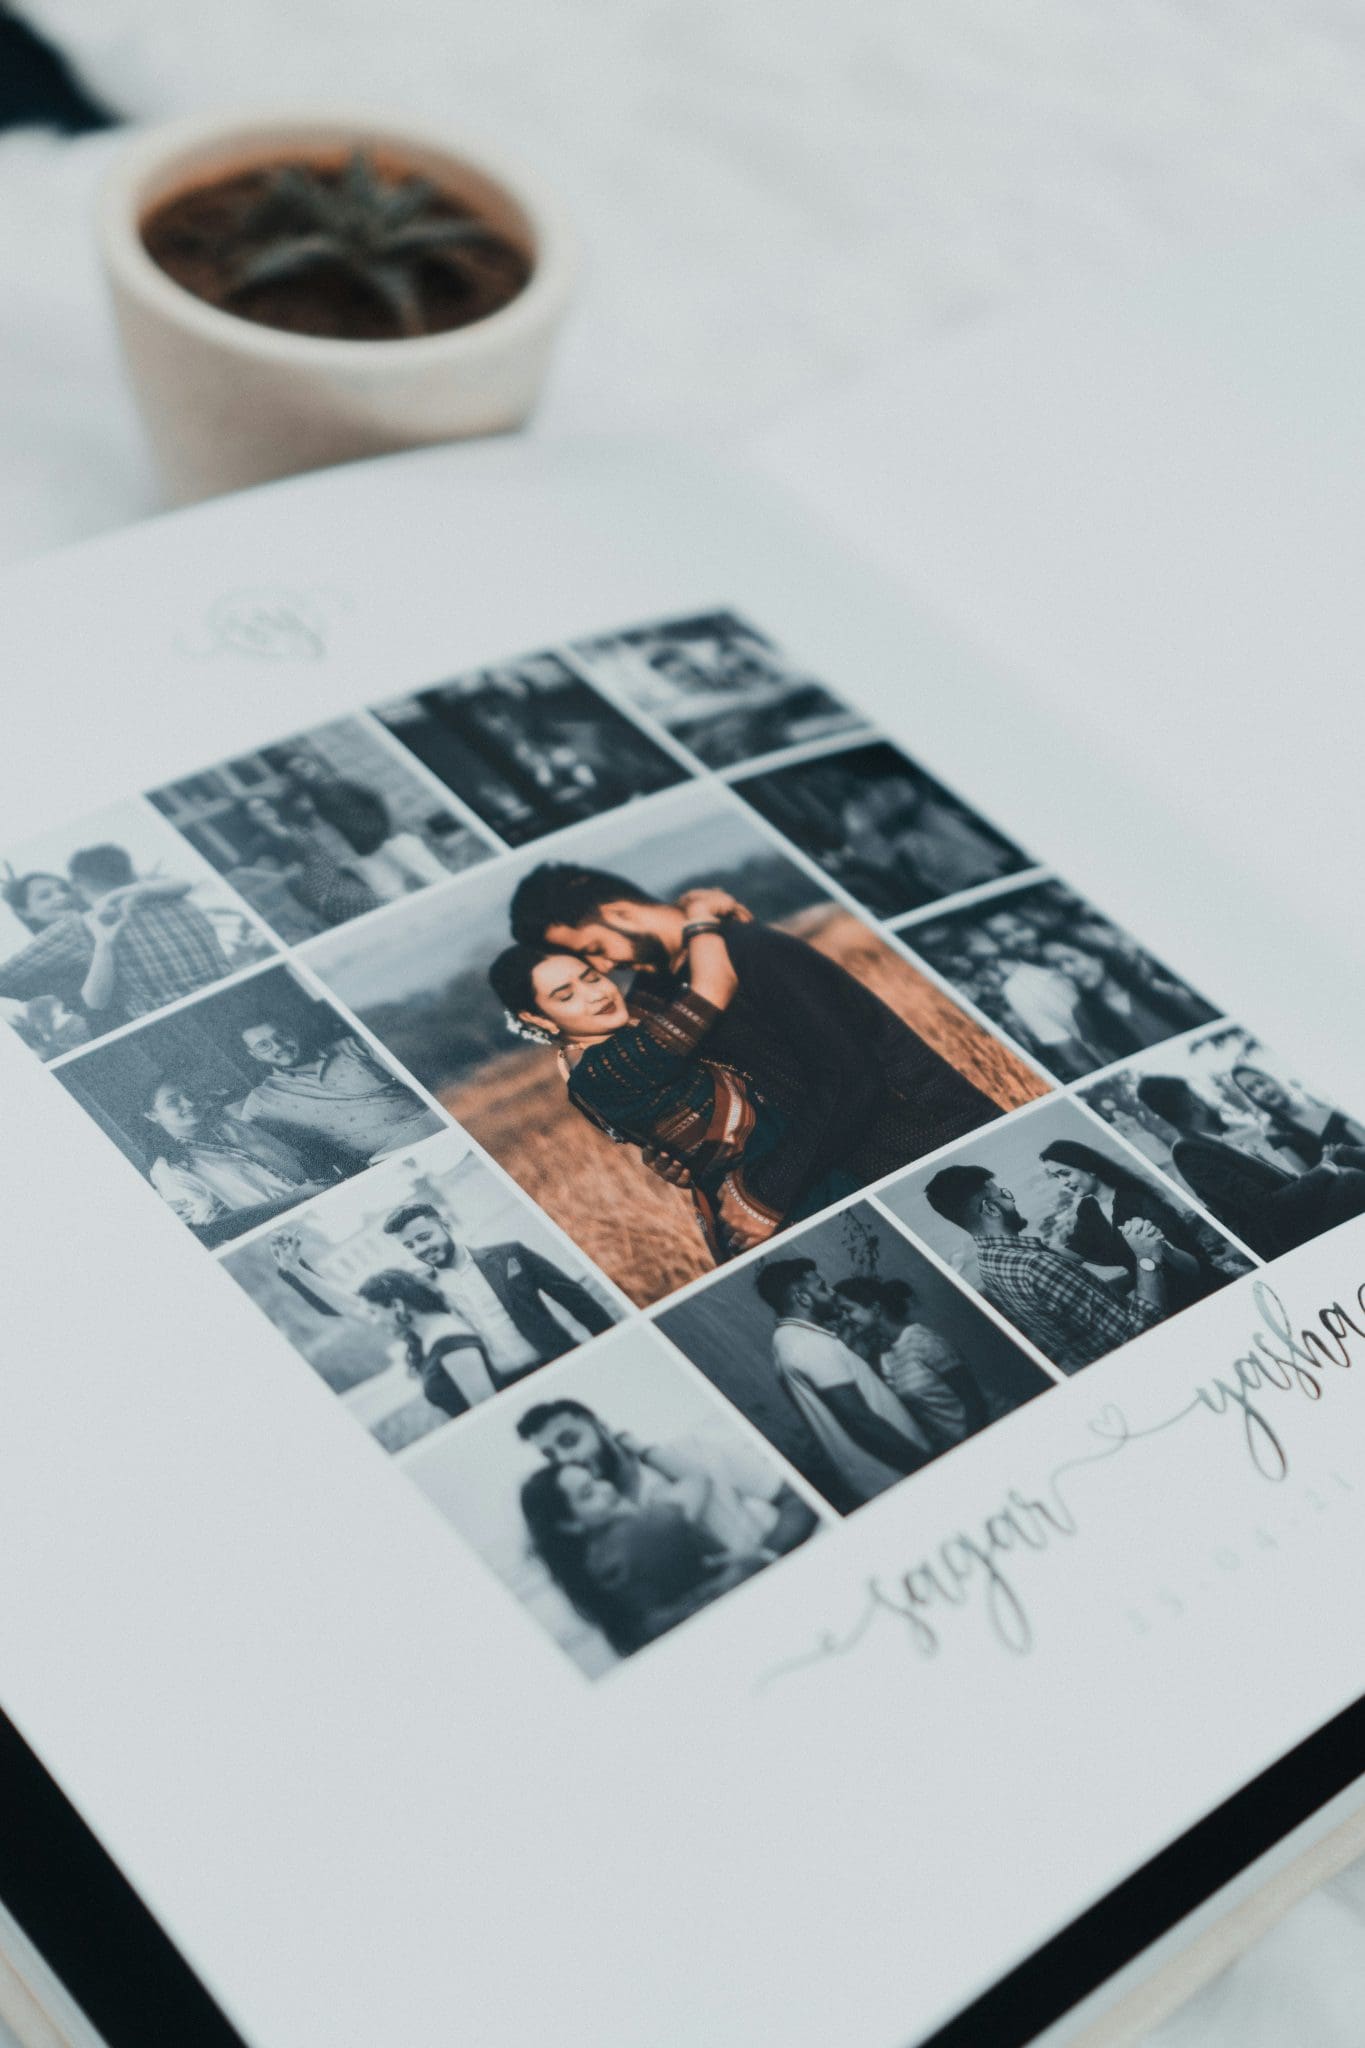 Make Your Wedding Unforgettable with Wellington’s Interactive Photo Booths